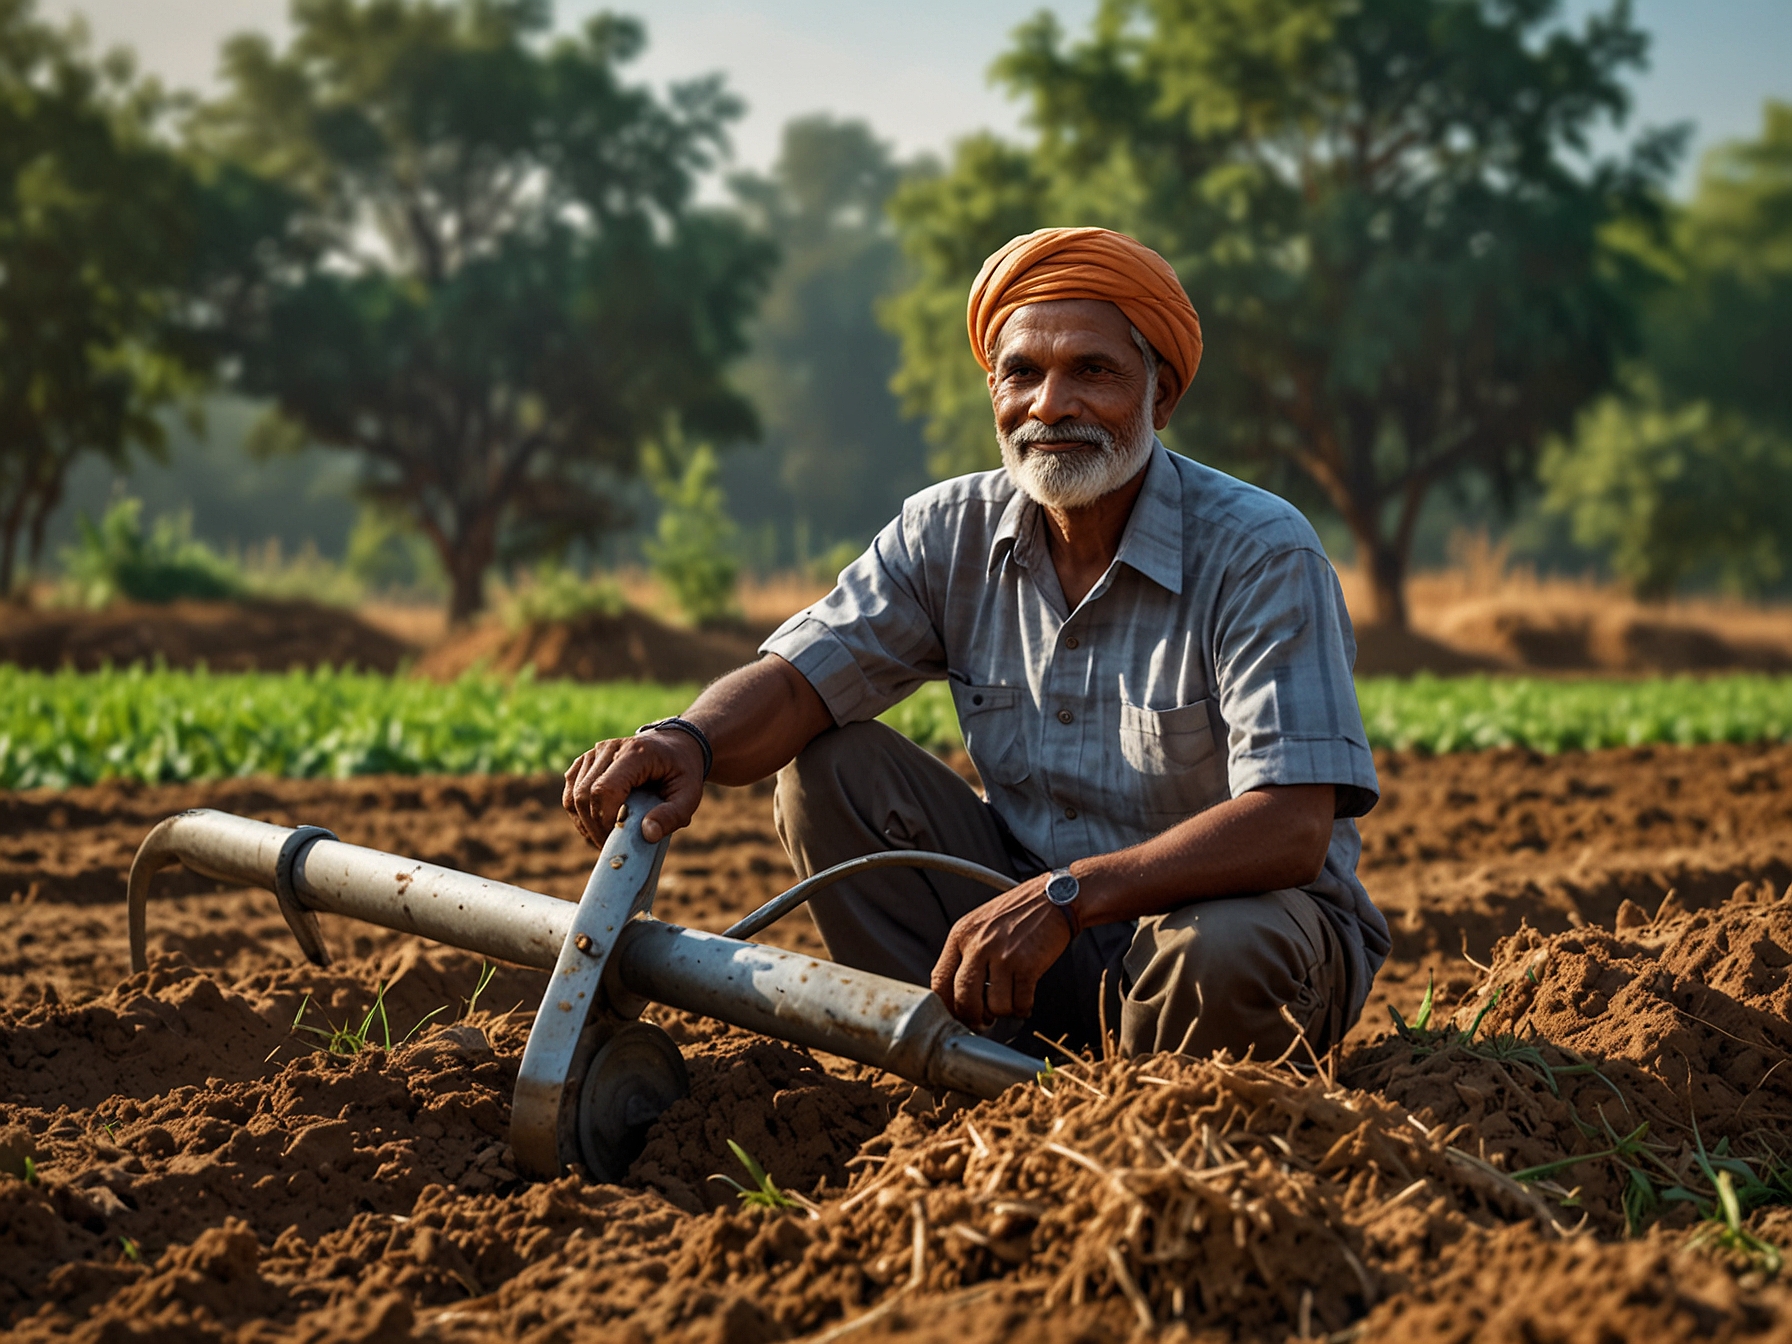 A farmer using improved agricultural equipment and seeds obtained through financial support from the PM Kisan Yojana, showing increased productivity and better crop yield.